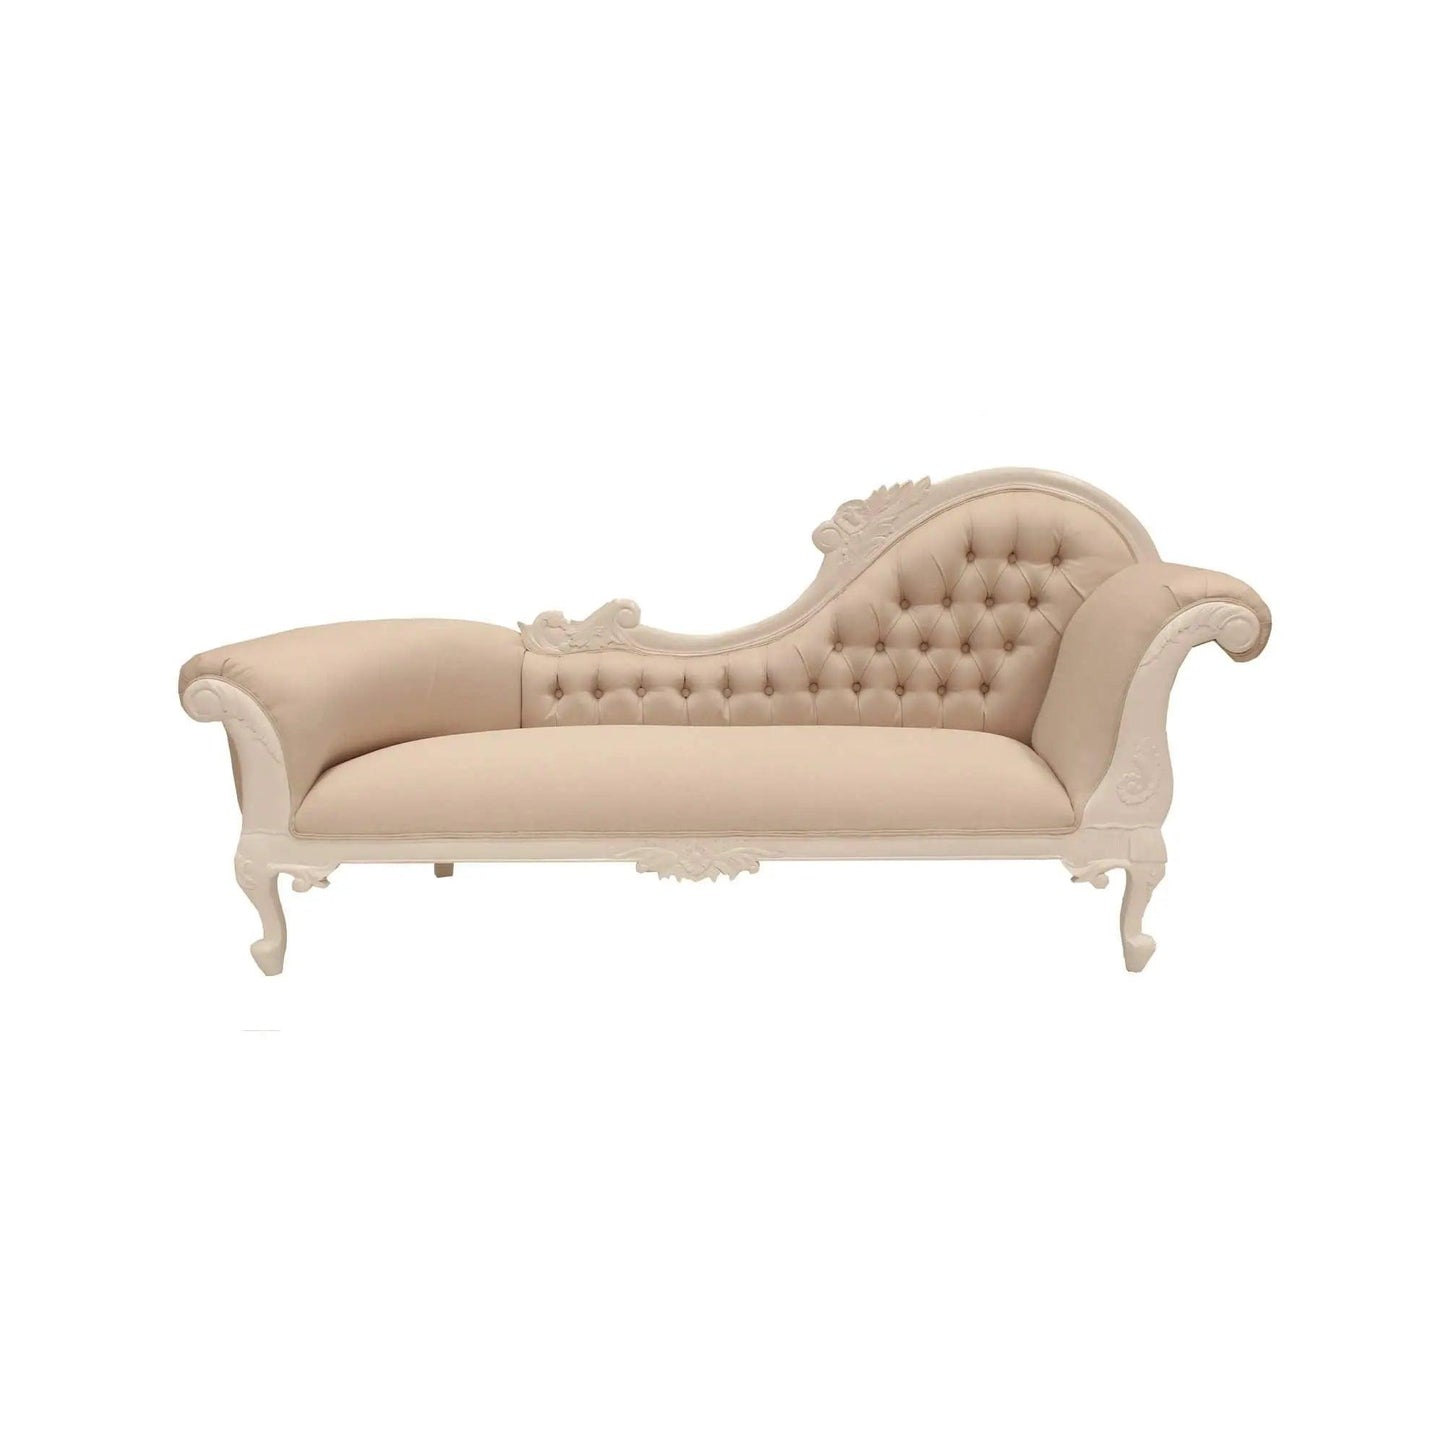 Right Side High Large Carved Chaise Lounge - SofasMCHA108RPDR9360245001004 7